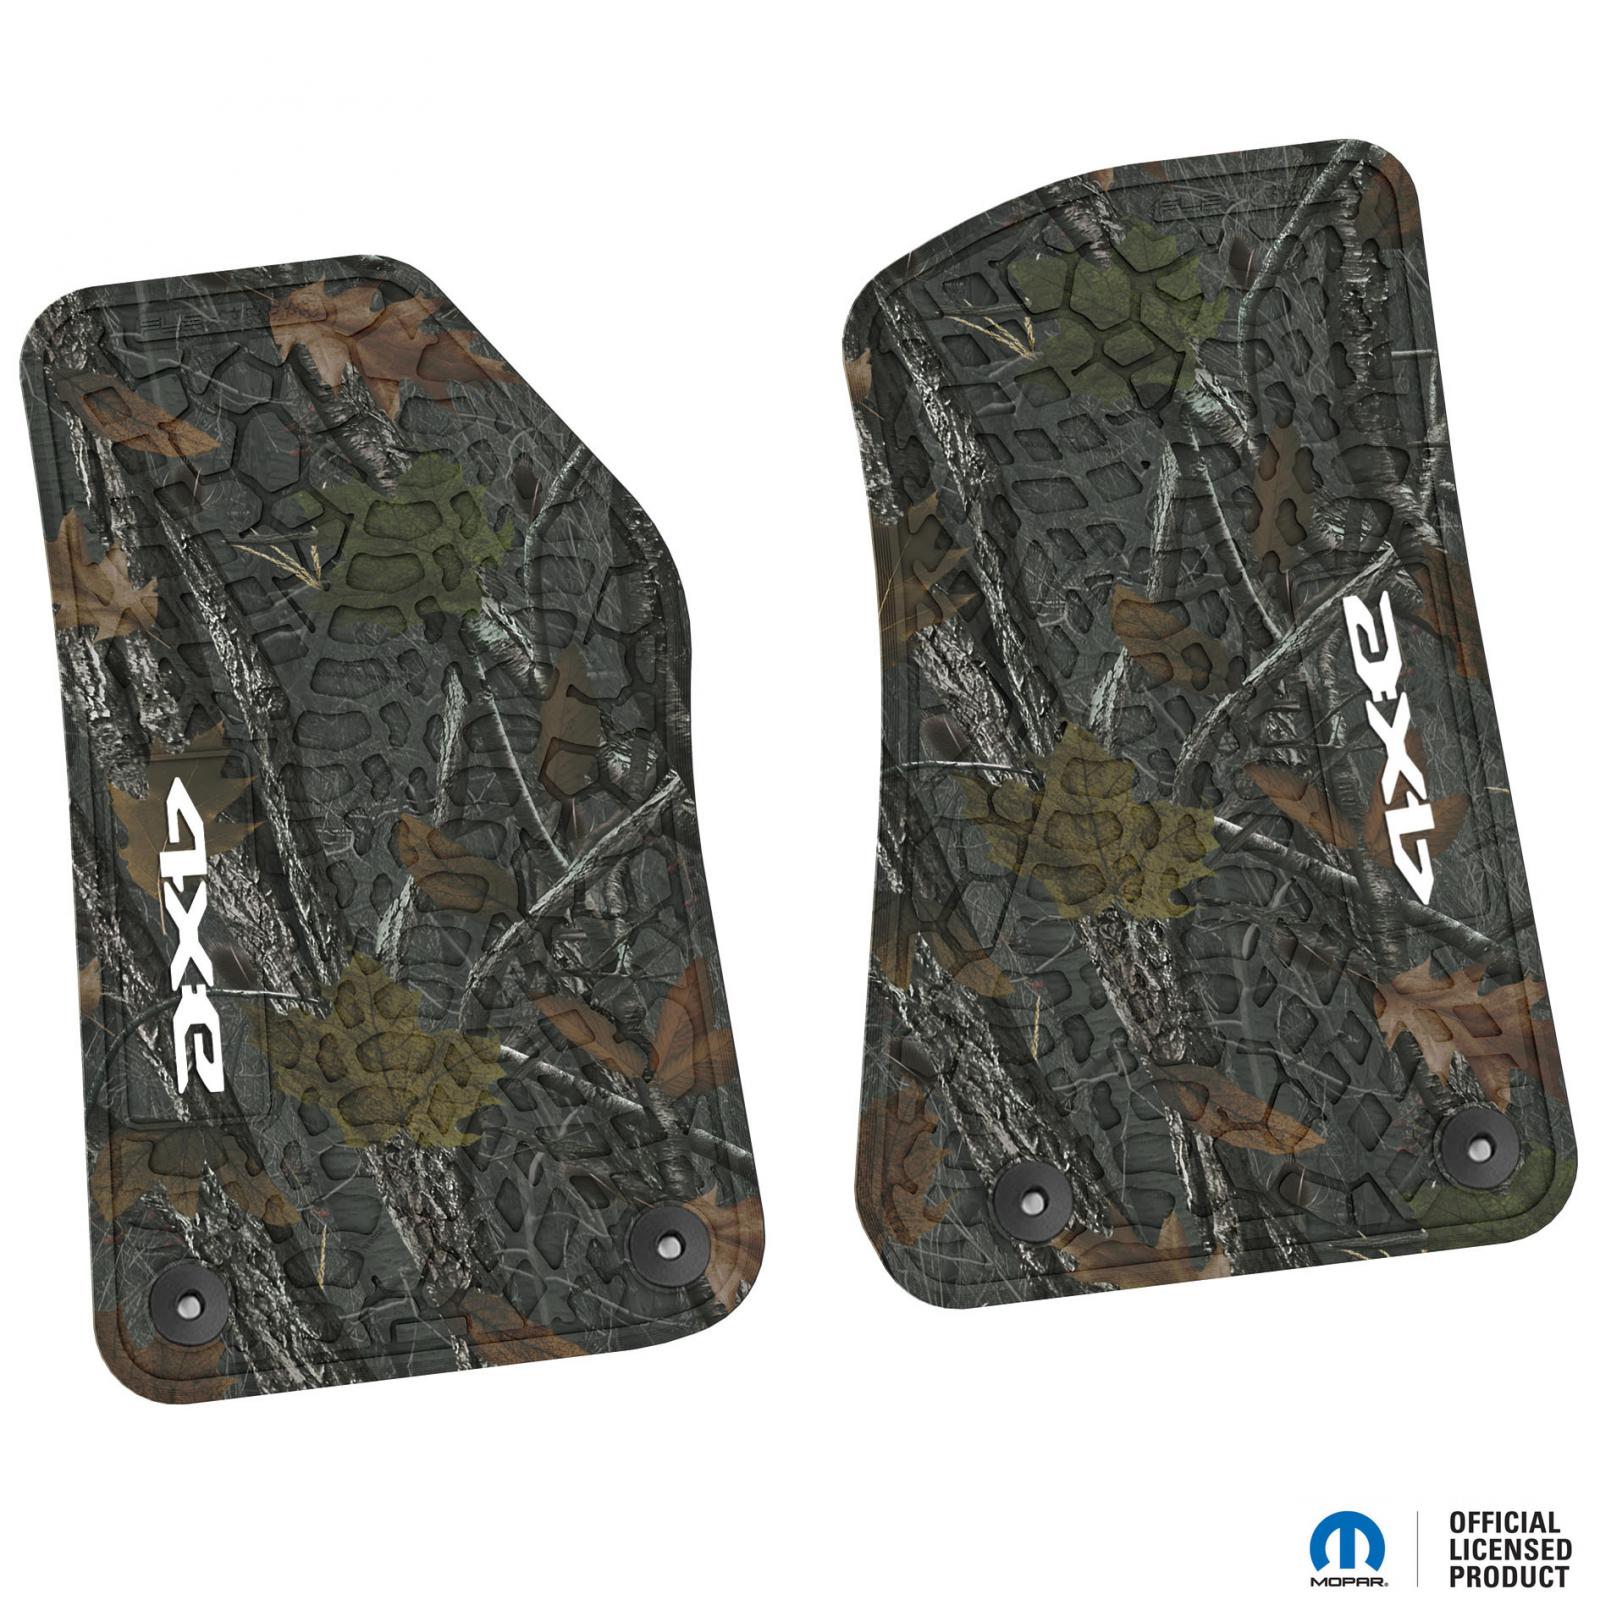 Jeep Floor Mats 18-23 Jeep Wrangler JL 2 Dr 2 Piece Tire Tread/Scorched Earth Scene w/ 4xe Insert - Rugged Woods w/ White insert FlexTread